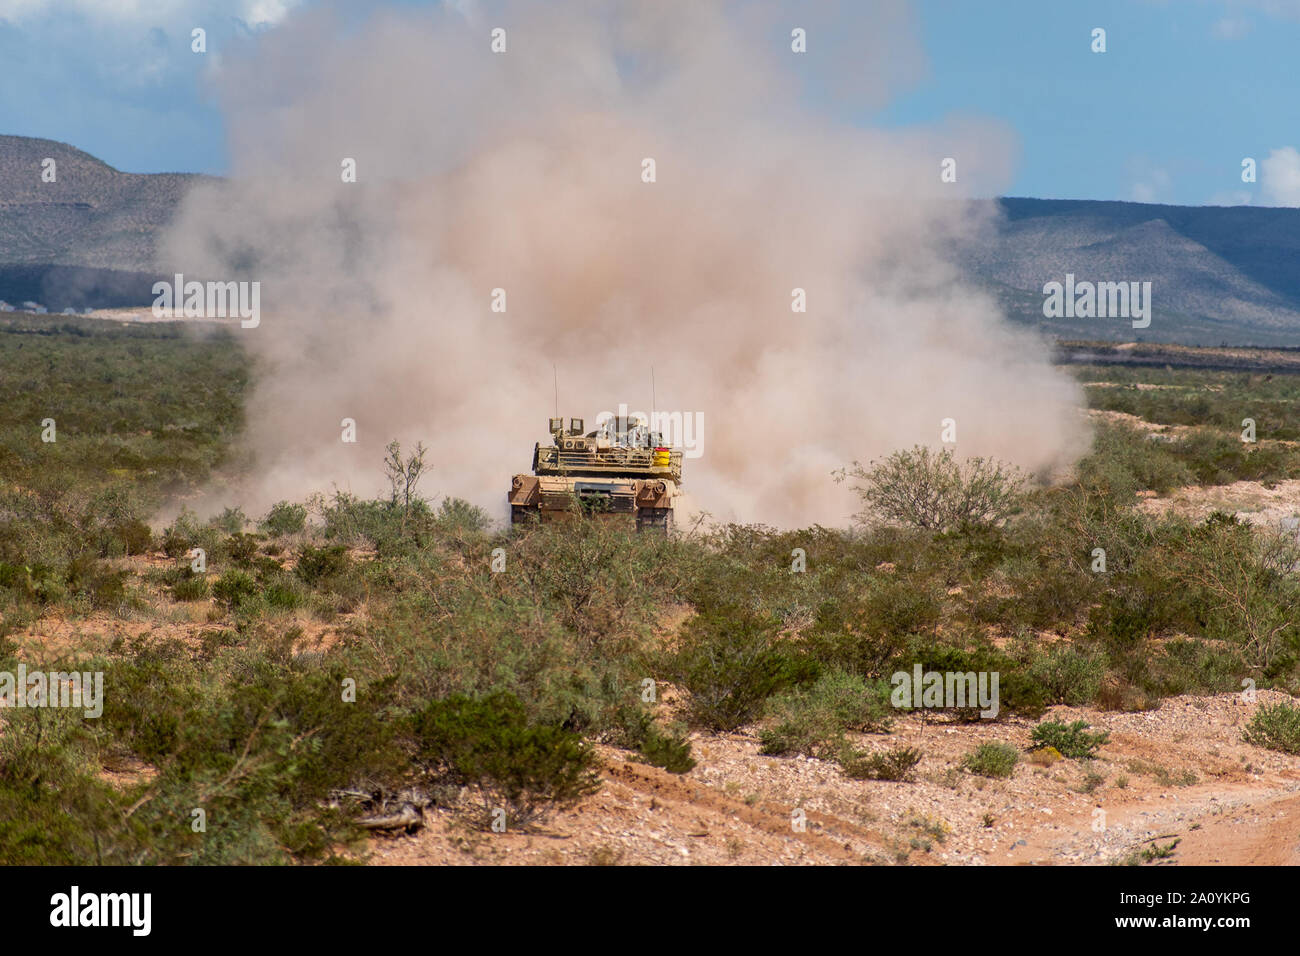 U.S. Soldiers with Delta Troop, 1-150th Cavalry Regiment, 30th Armored Brigade Combat Team, North Carolina Army National Guard, conduct a Combined Arms Live Fire Exercise (CALFX) in the vicinity of Fort Bliss, Texas, Sept. 20, 2019. The unit is mobilized to support Operation Spartan Shield in the Middle East with units from the North Carolina, South Carolina, West Virginia and Ohio Army National Guard. (U.S. Army National Guard photo by Sgt. Devin Lewis) Stock Photo